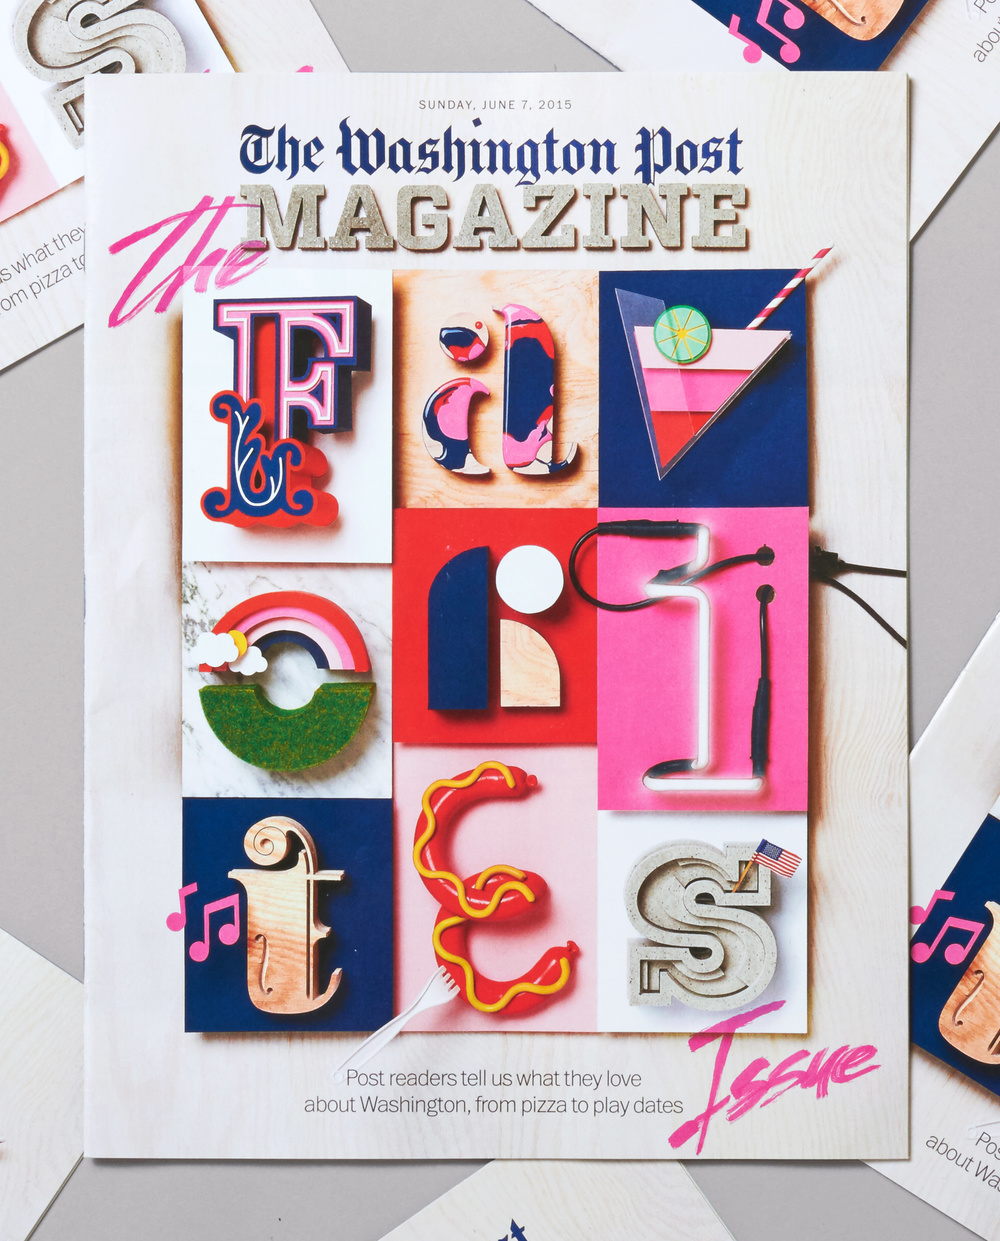 Washington Post To Run Front Page Ads